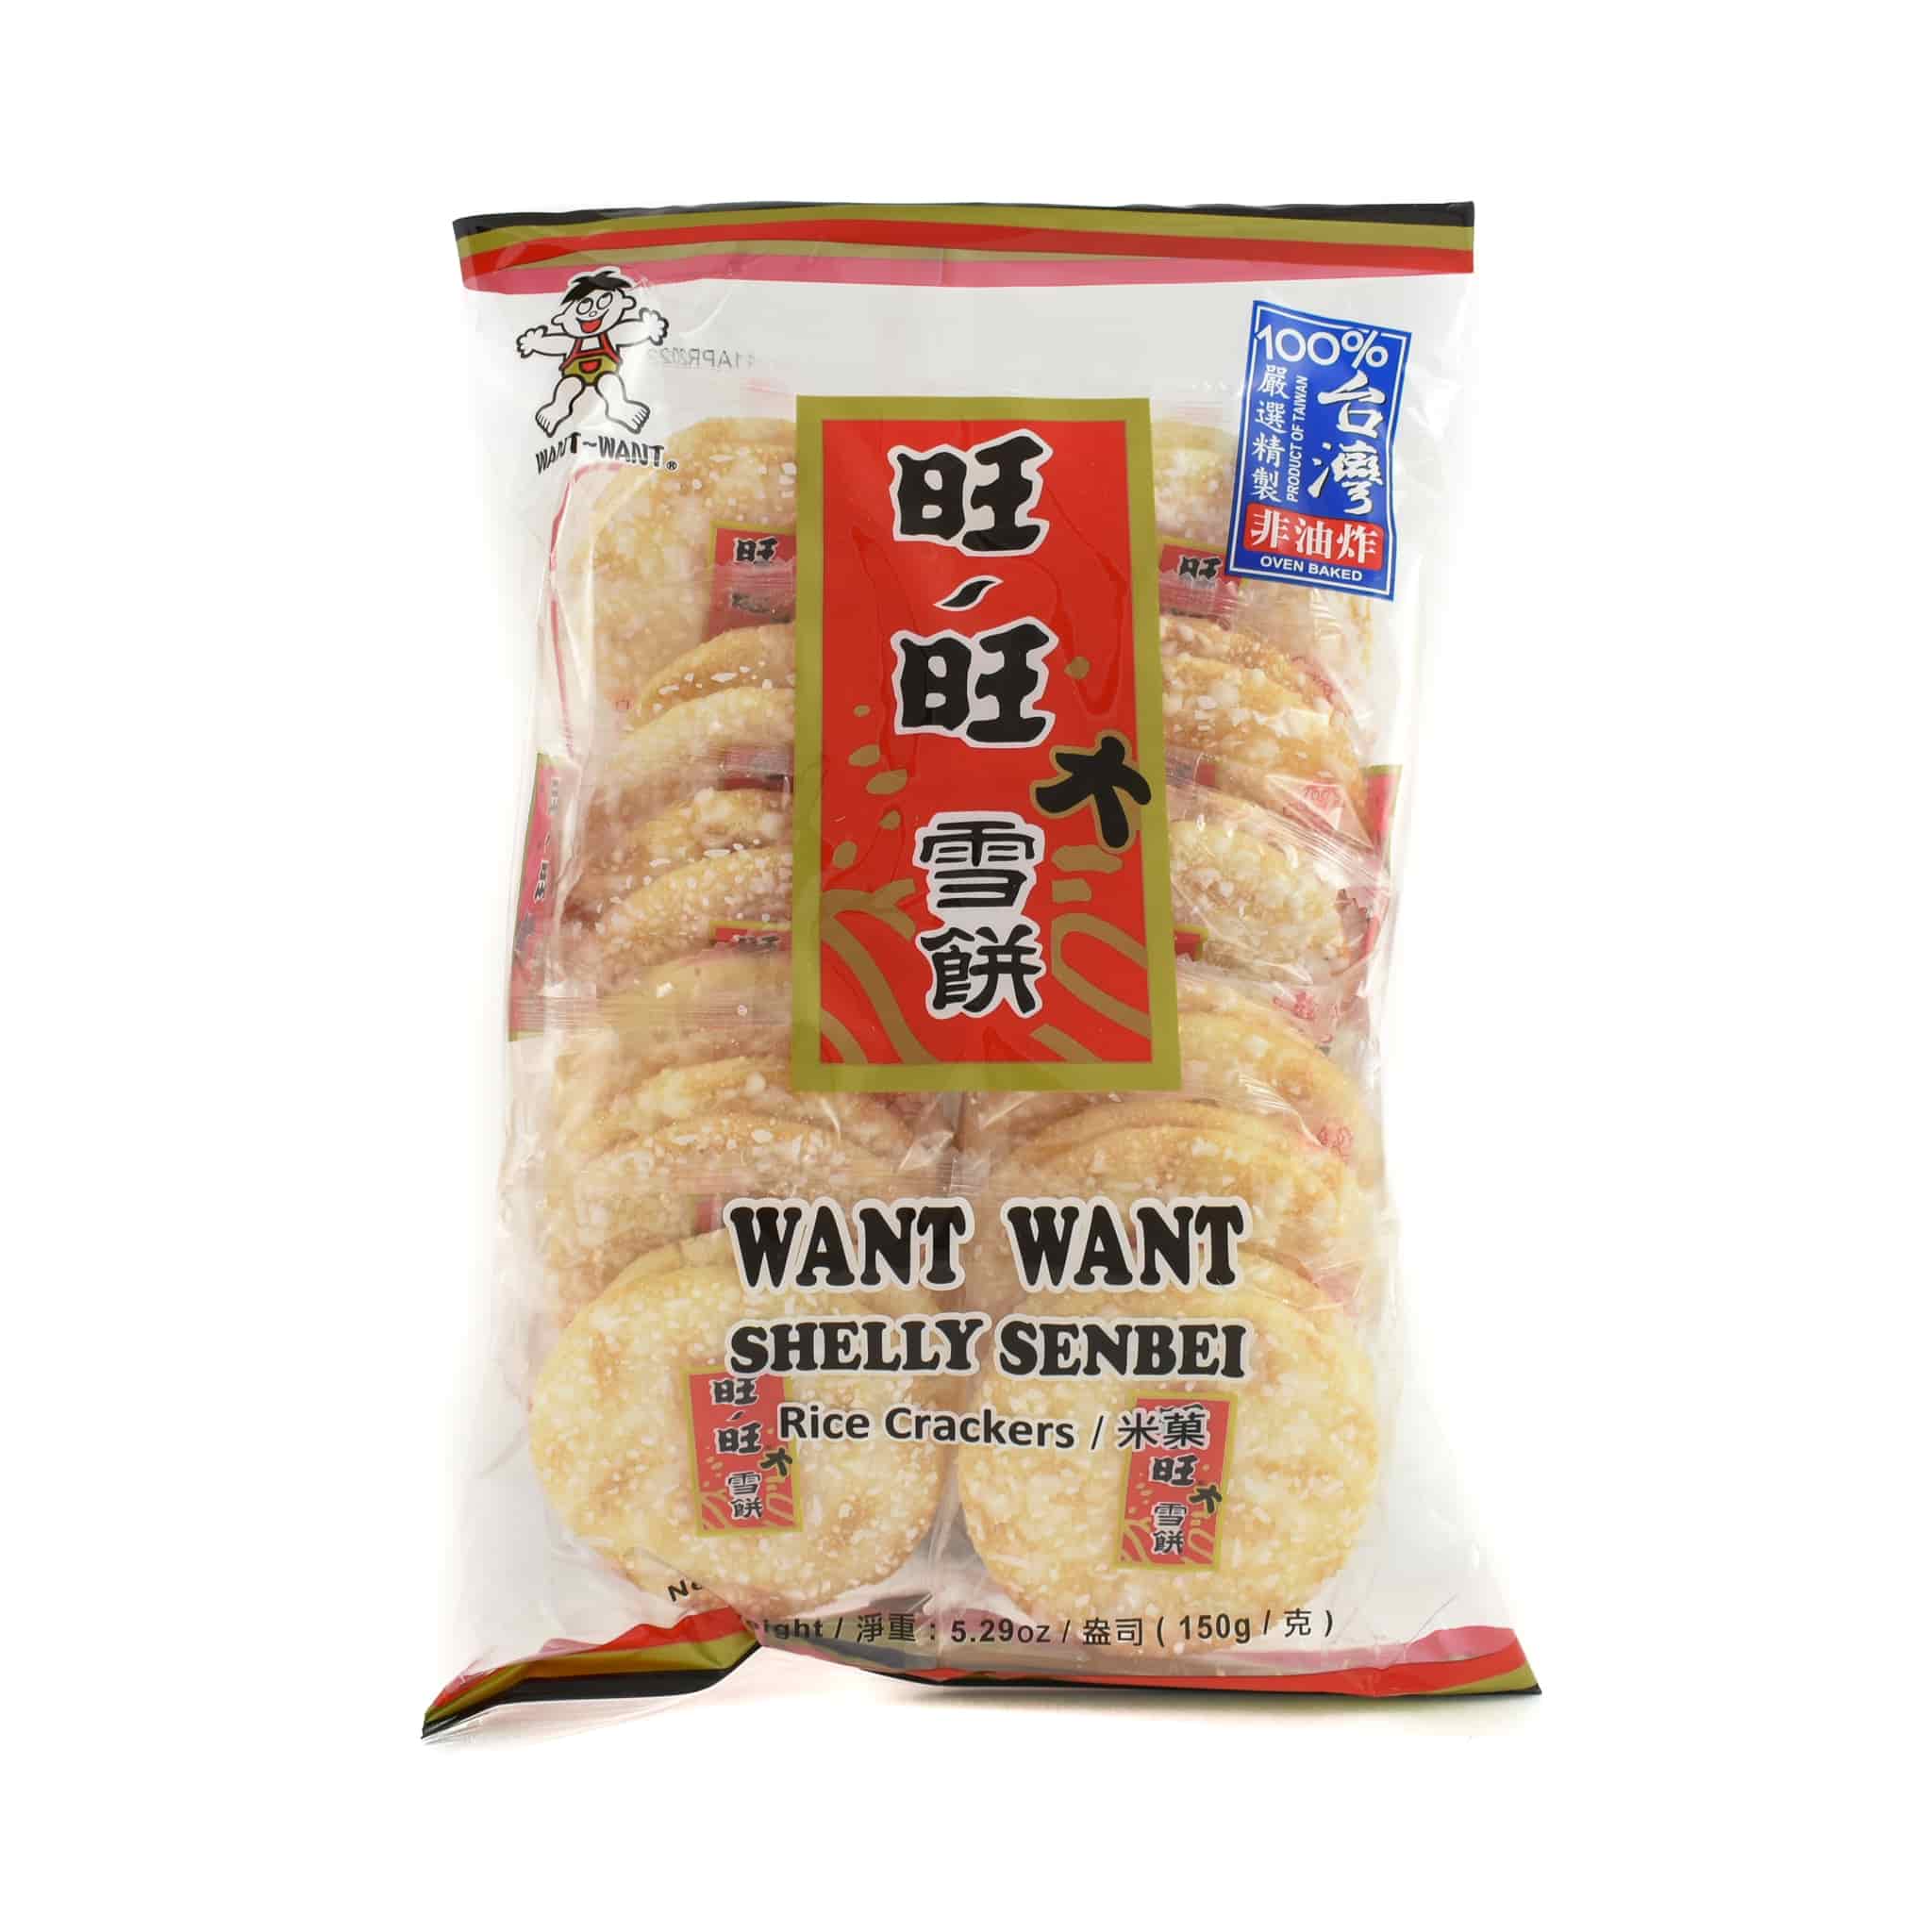 Want Want Shelly Senbei Rice Crackers 150g